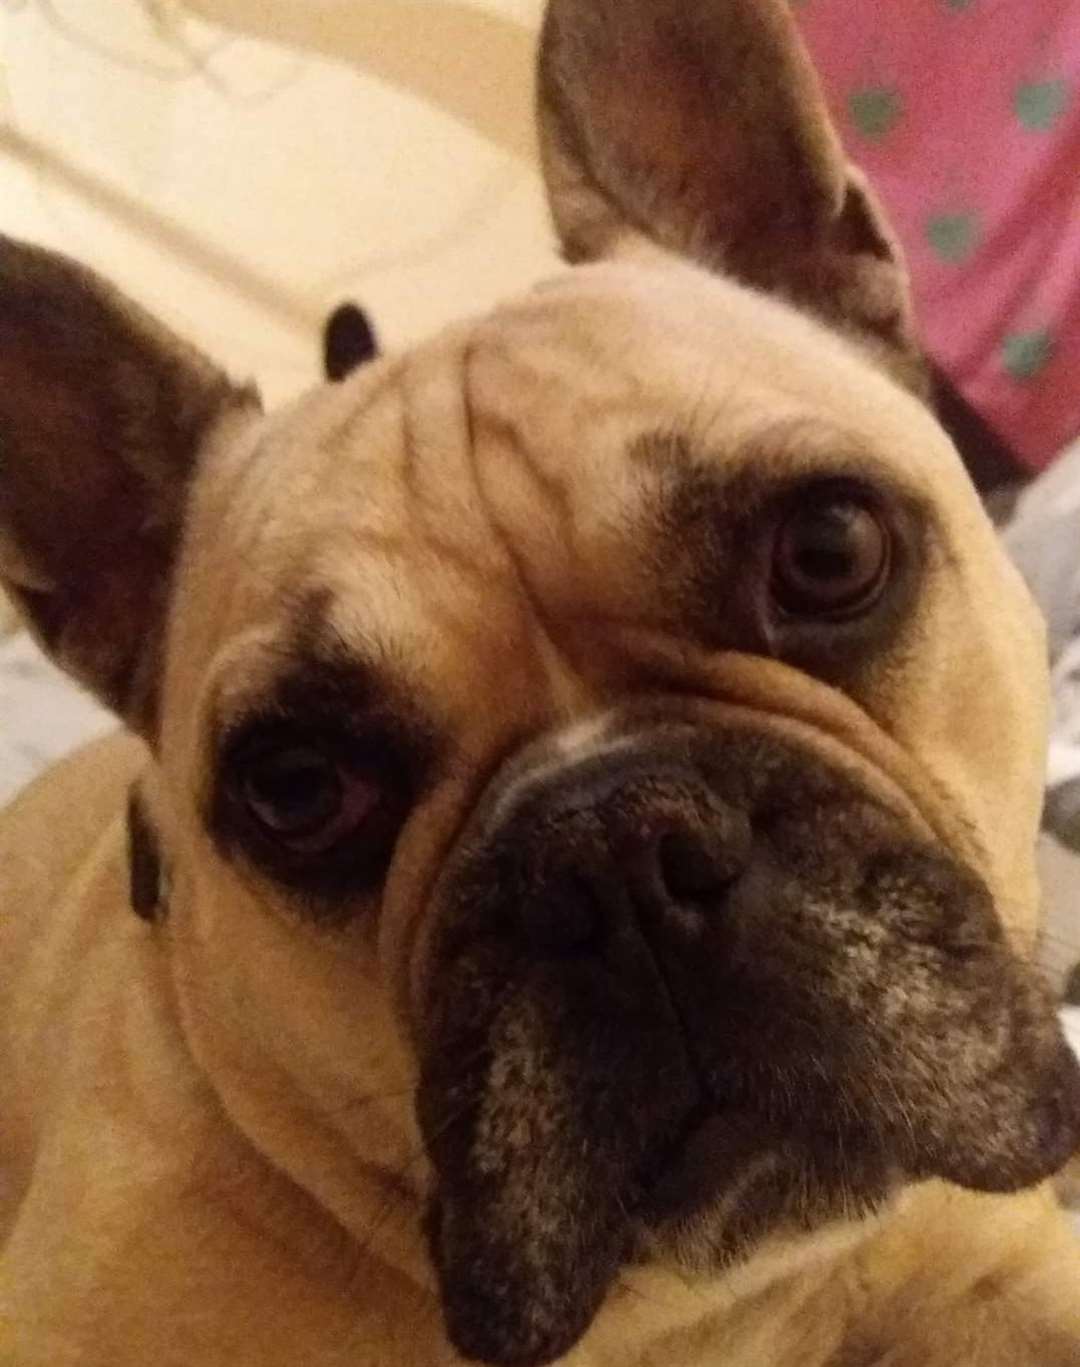 Teddy, a five year old French Bulldog, has been missing since October 30. Pictures: Jacob Burnett